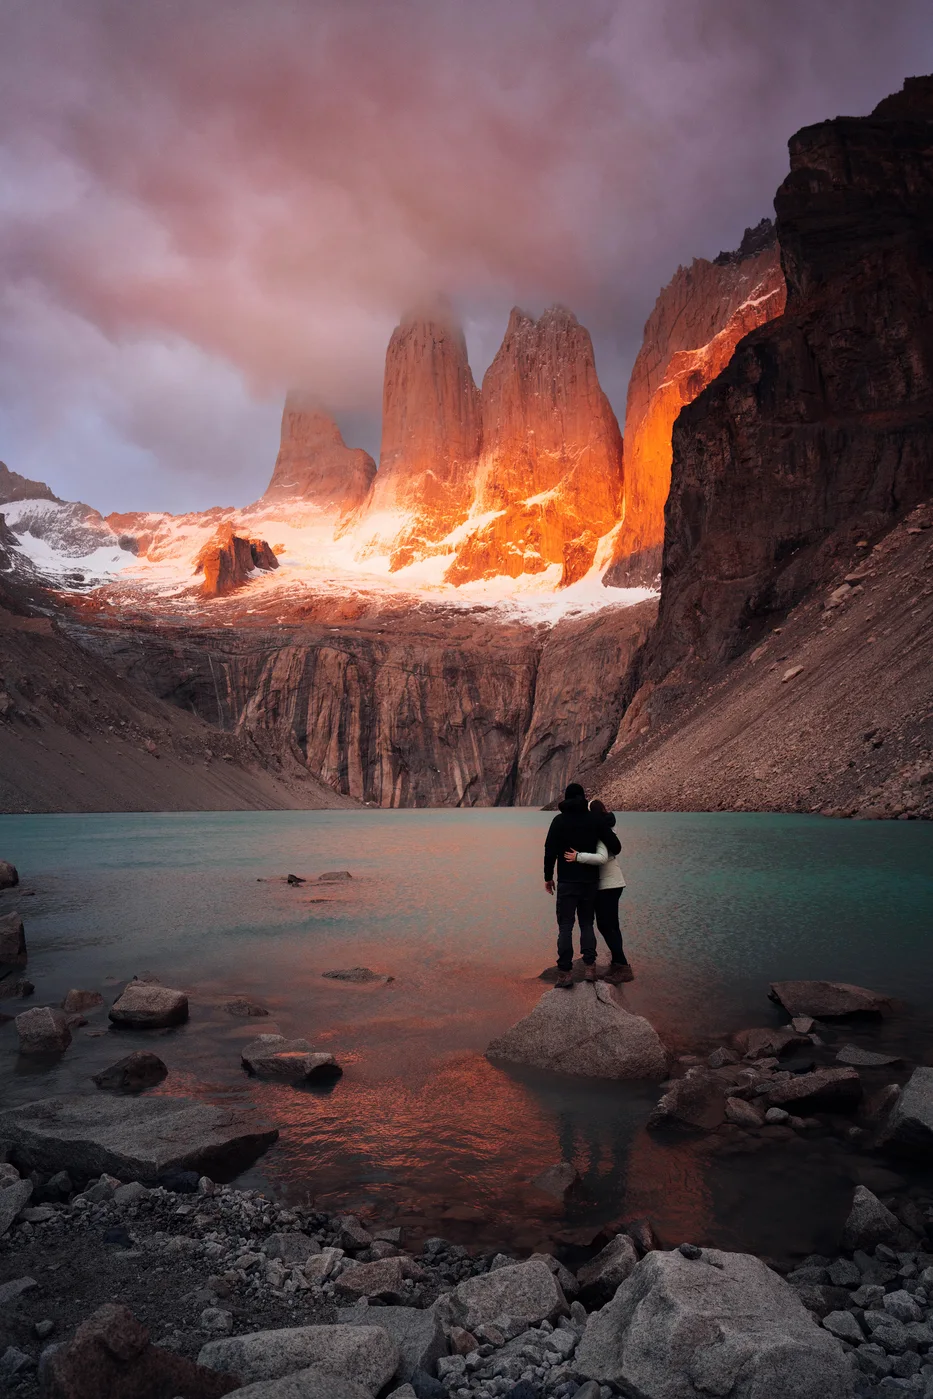 Full guide to hiking the W-Trek in Torres del Paine National Park